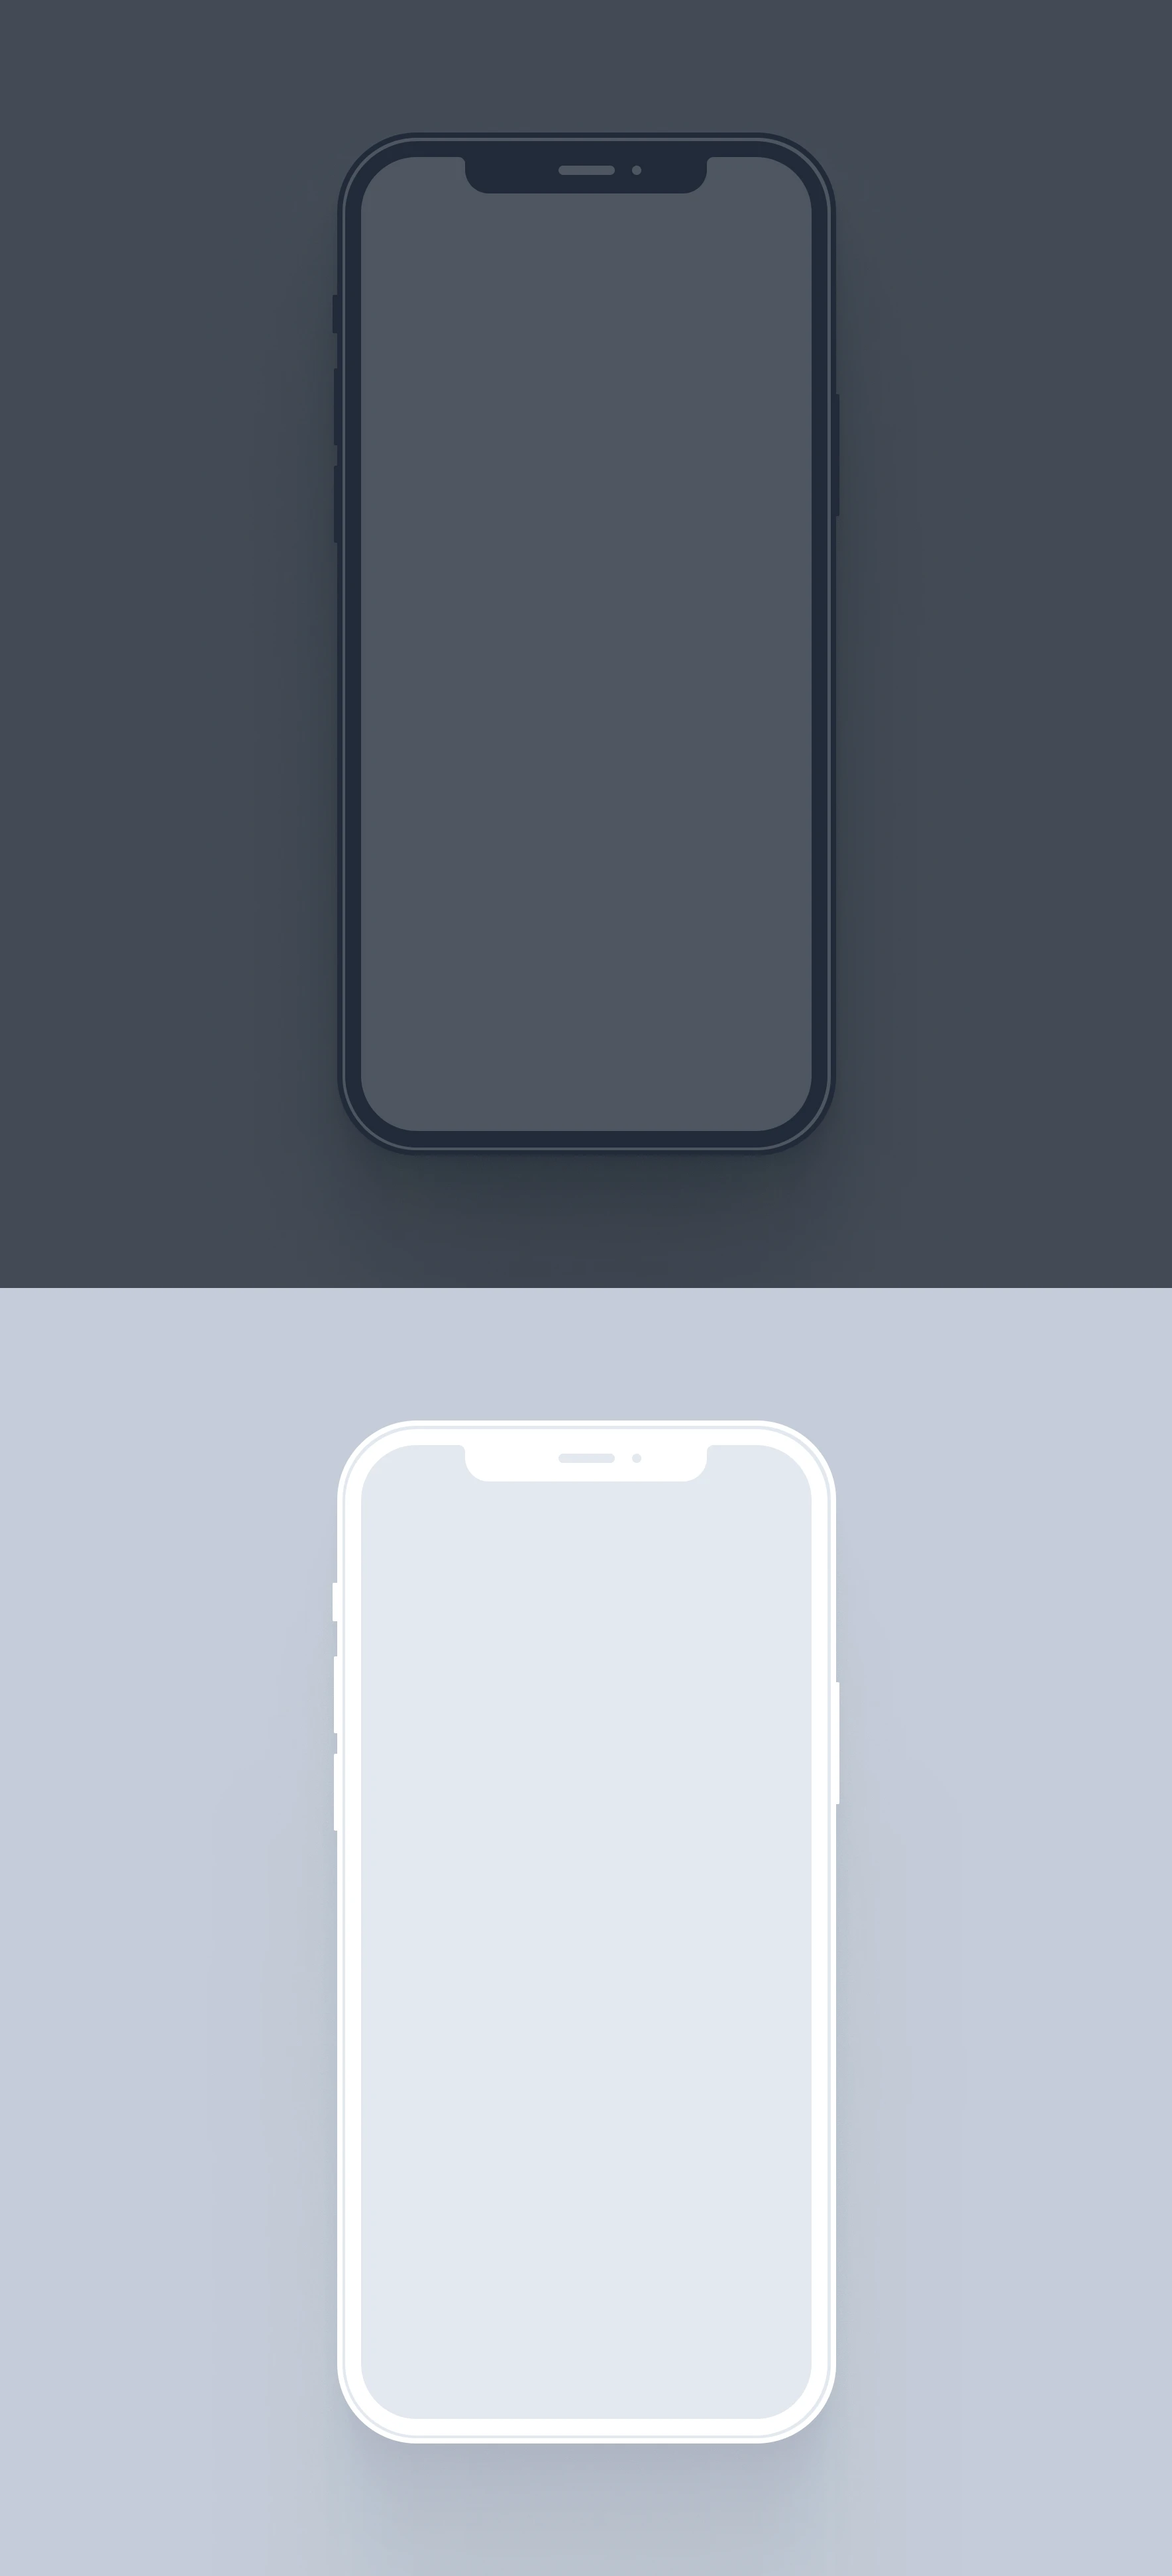 iPhone 12 Pro Free Mockup for Figma - Elegant and clean free iPhone 12 mockup for any kind of app. Dark & Light devices for you to get started.